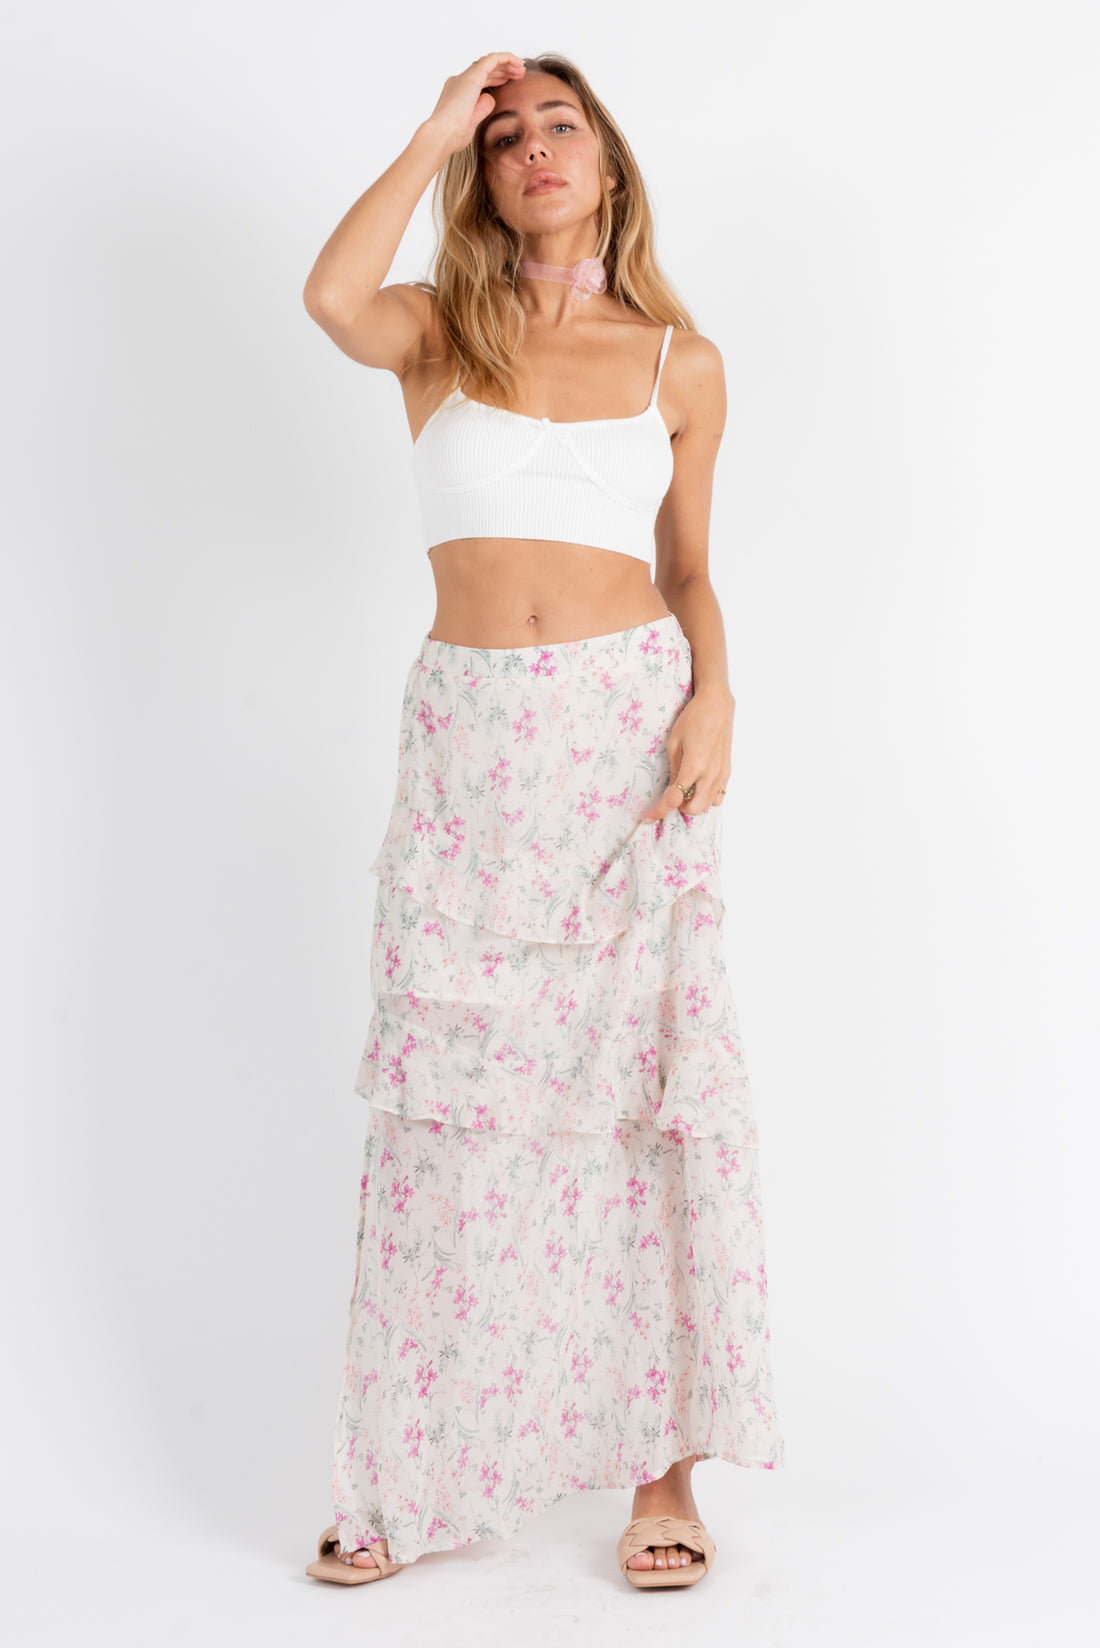 Blooms Floral Tiered Ruffle Maxi Skirt/Dress